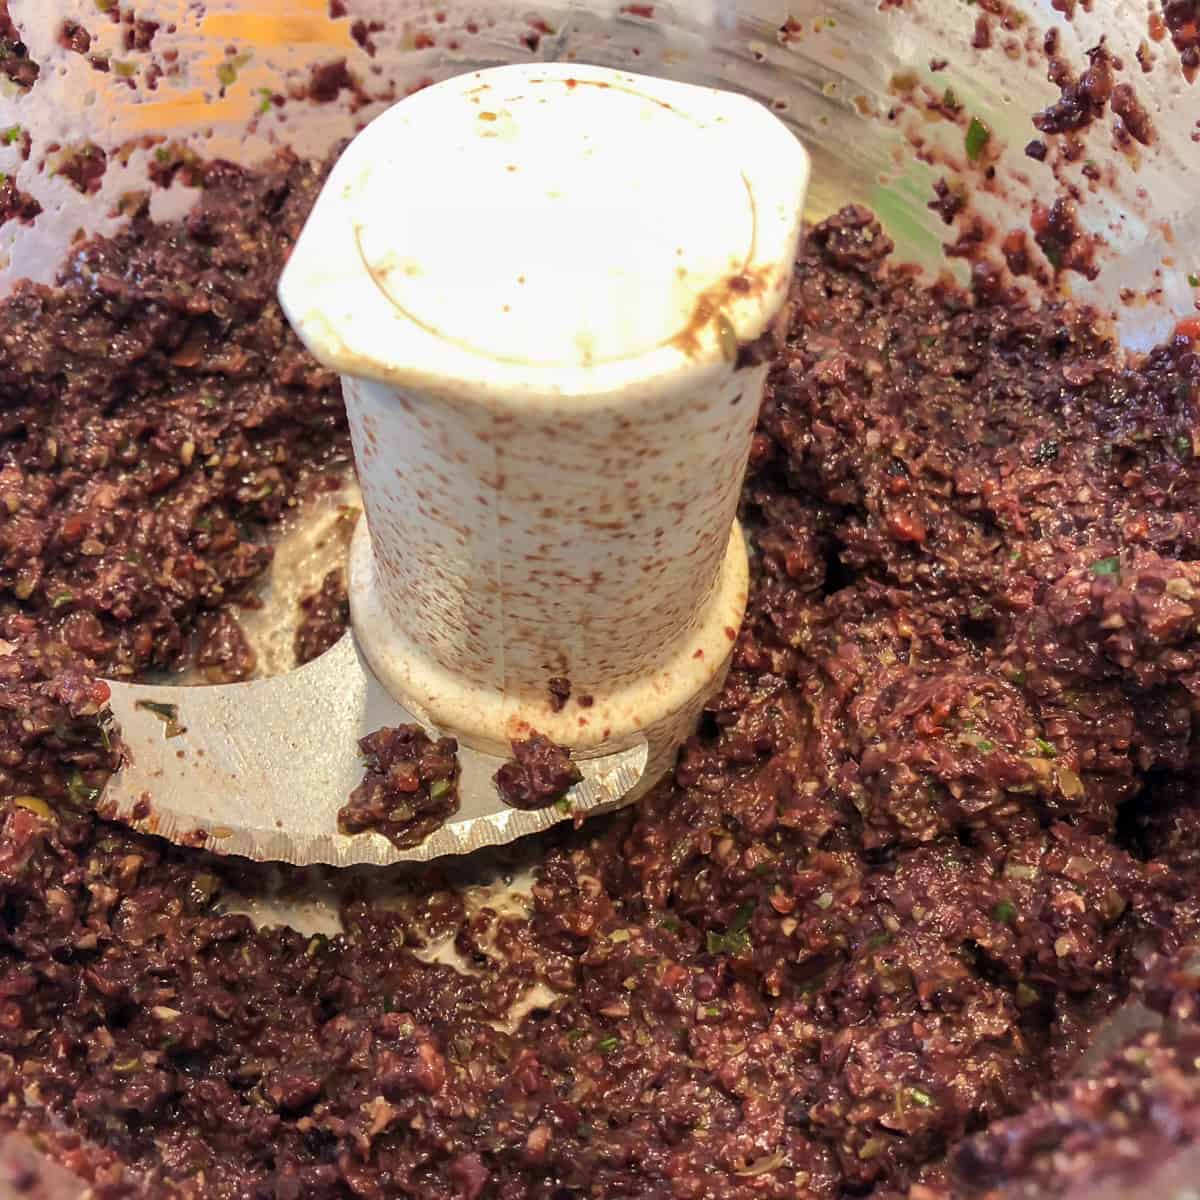 Ingredients pulsed in a food processor to form a paste.